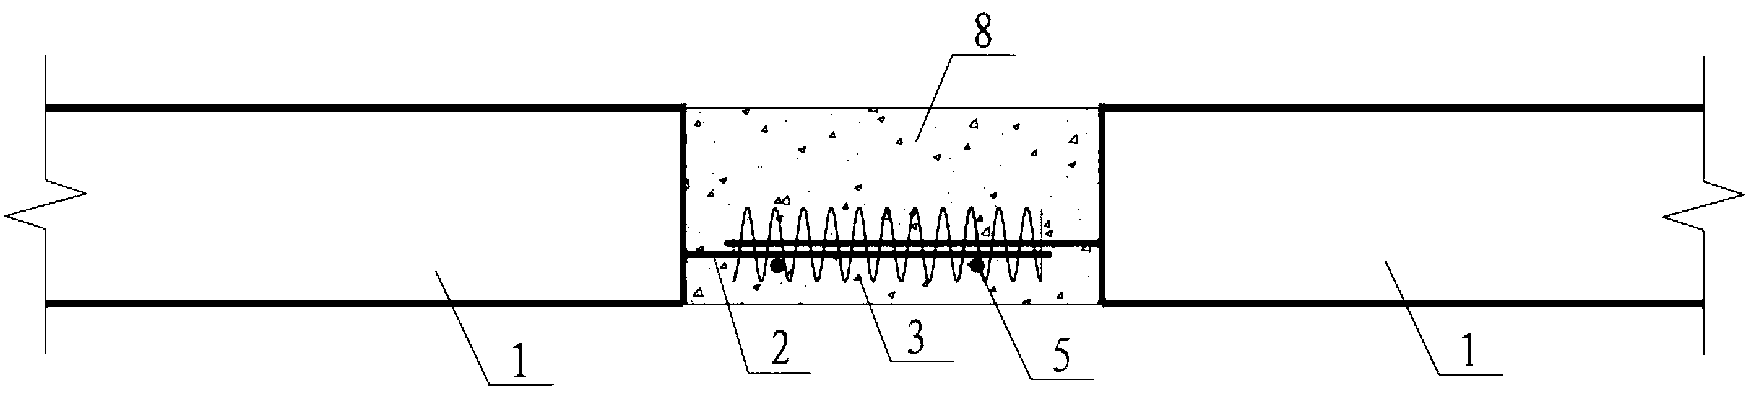 Method for splicing and connecting precast reinforced concrete floor slabs within span